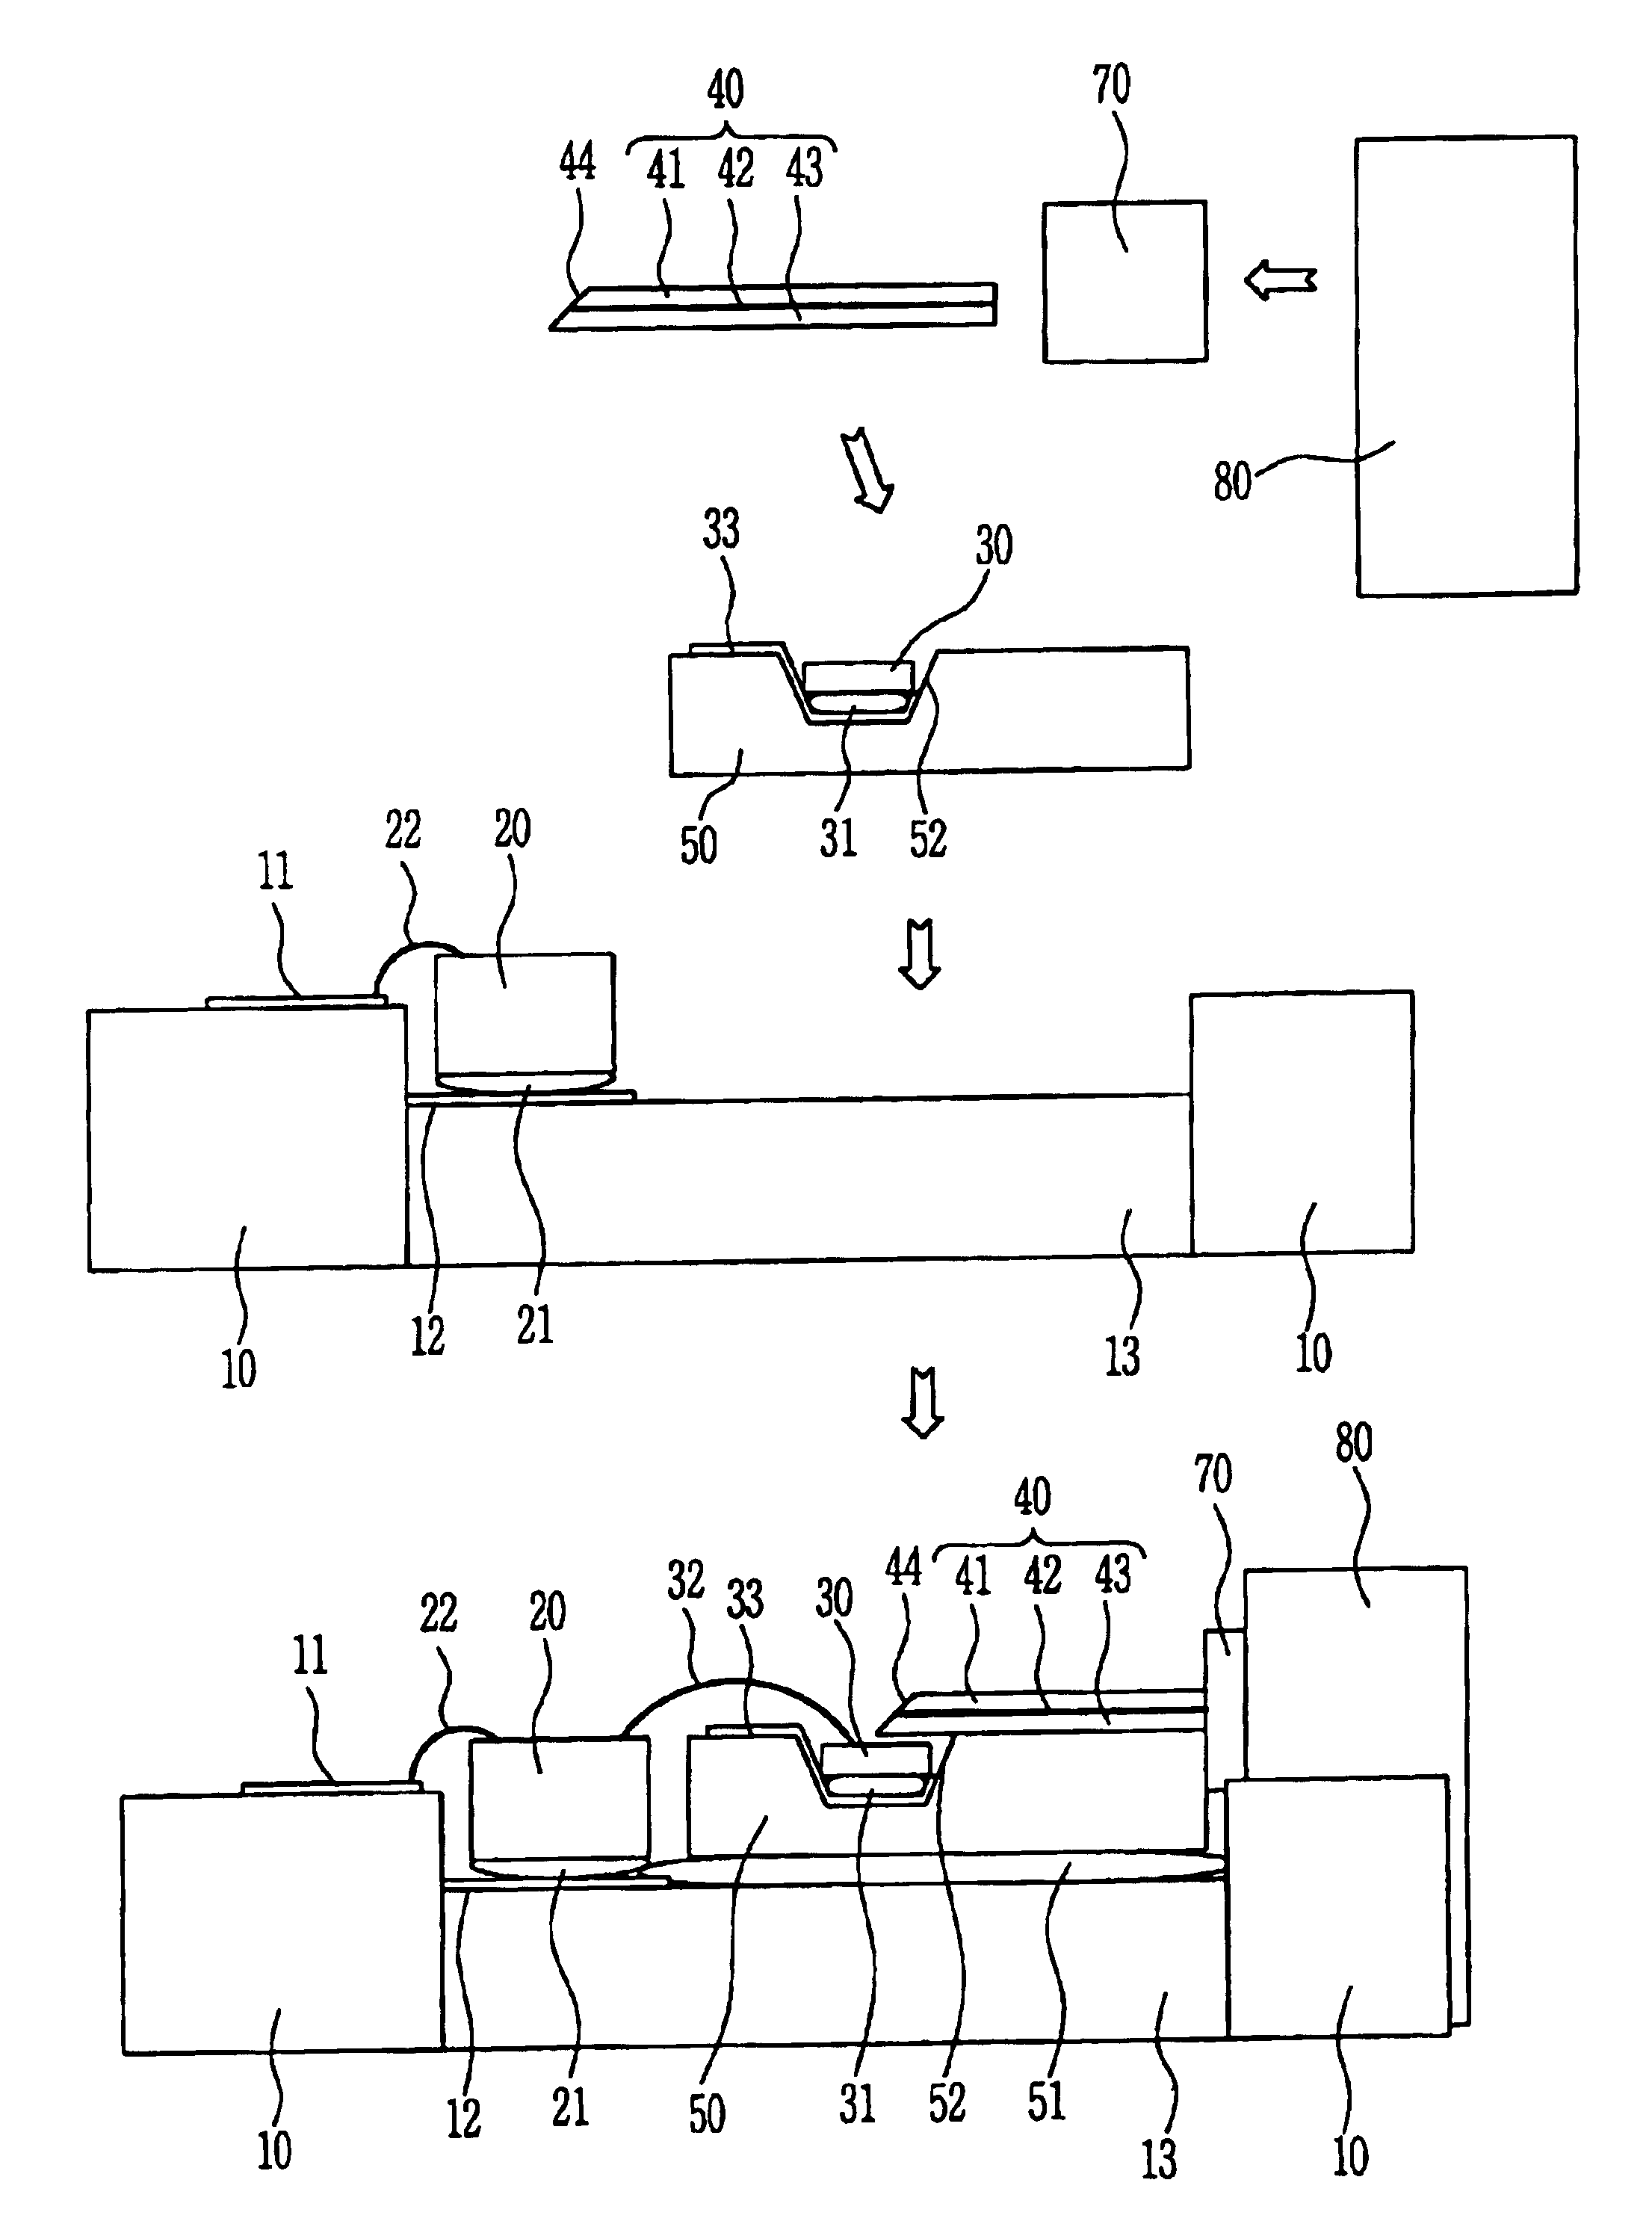 Parallel optical interconnection module and method for manufacturing the same